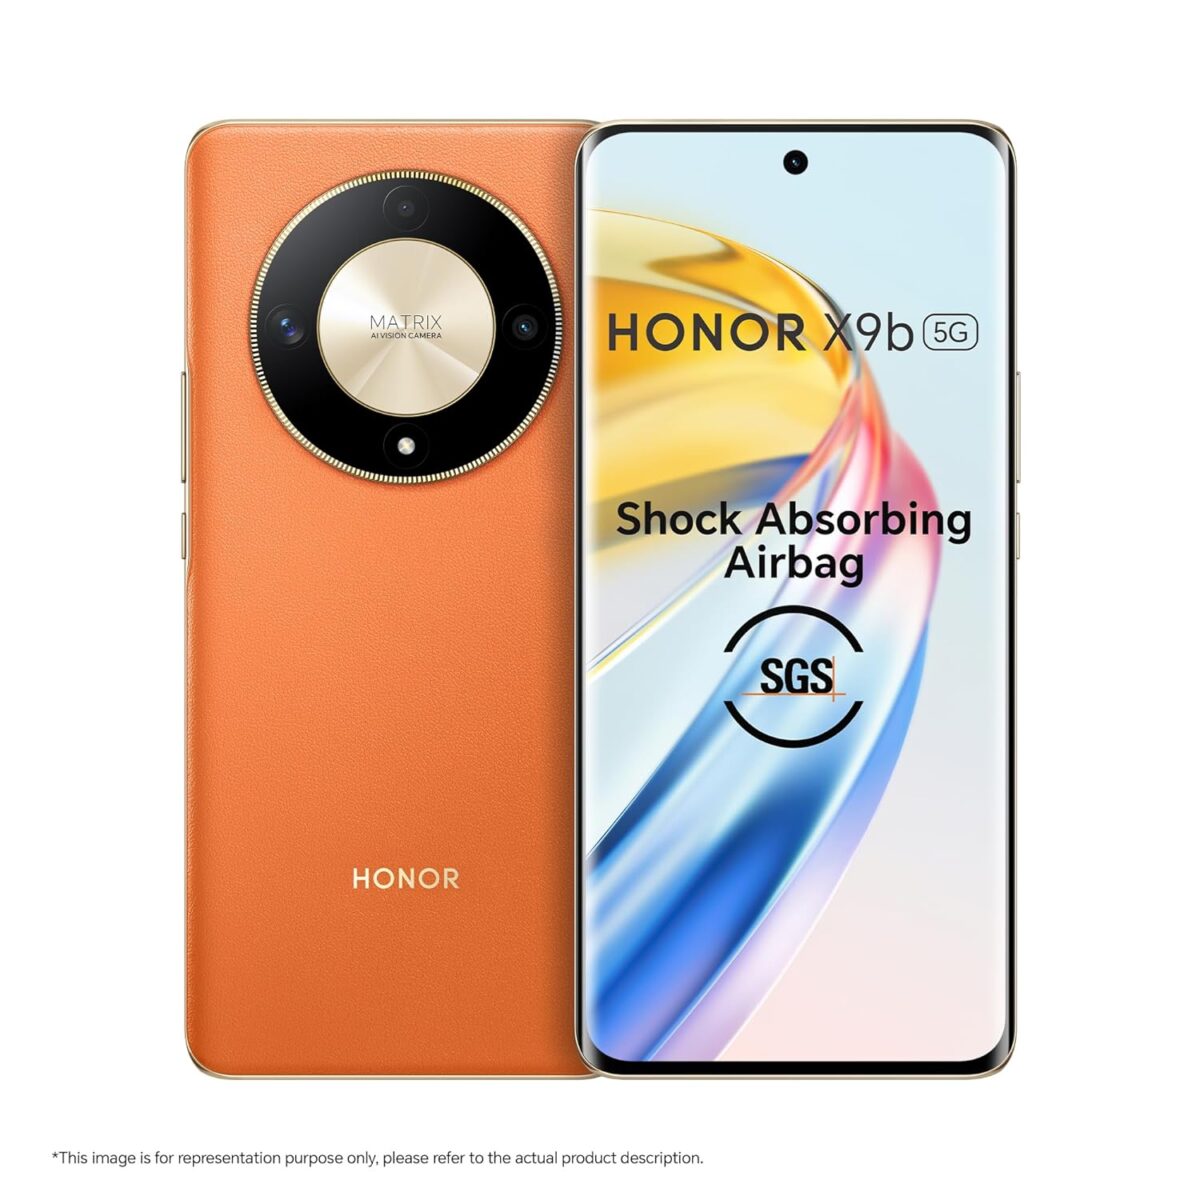 HONOR X9b 5G Android Smartphone Launched in India | Check Price, Specs and Features